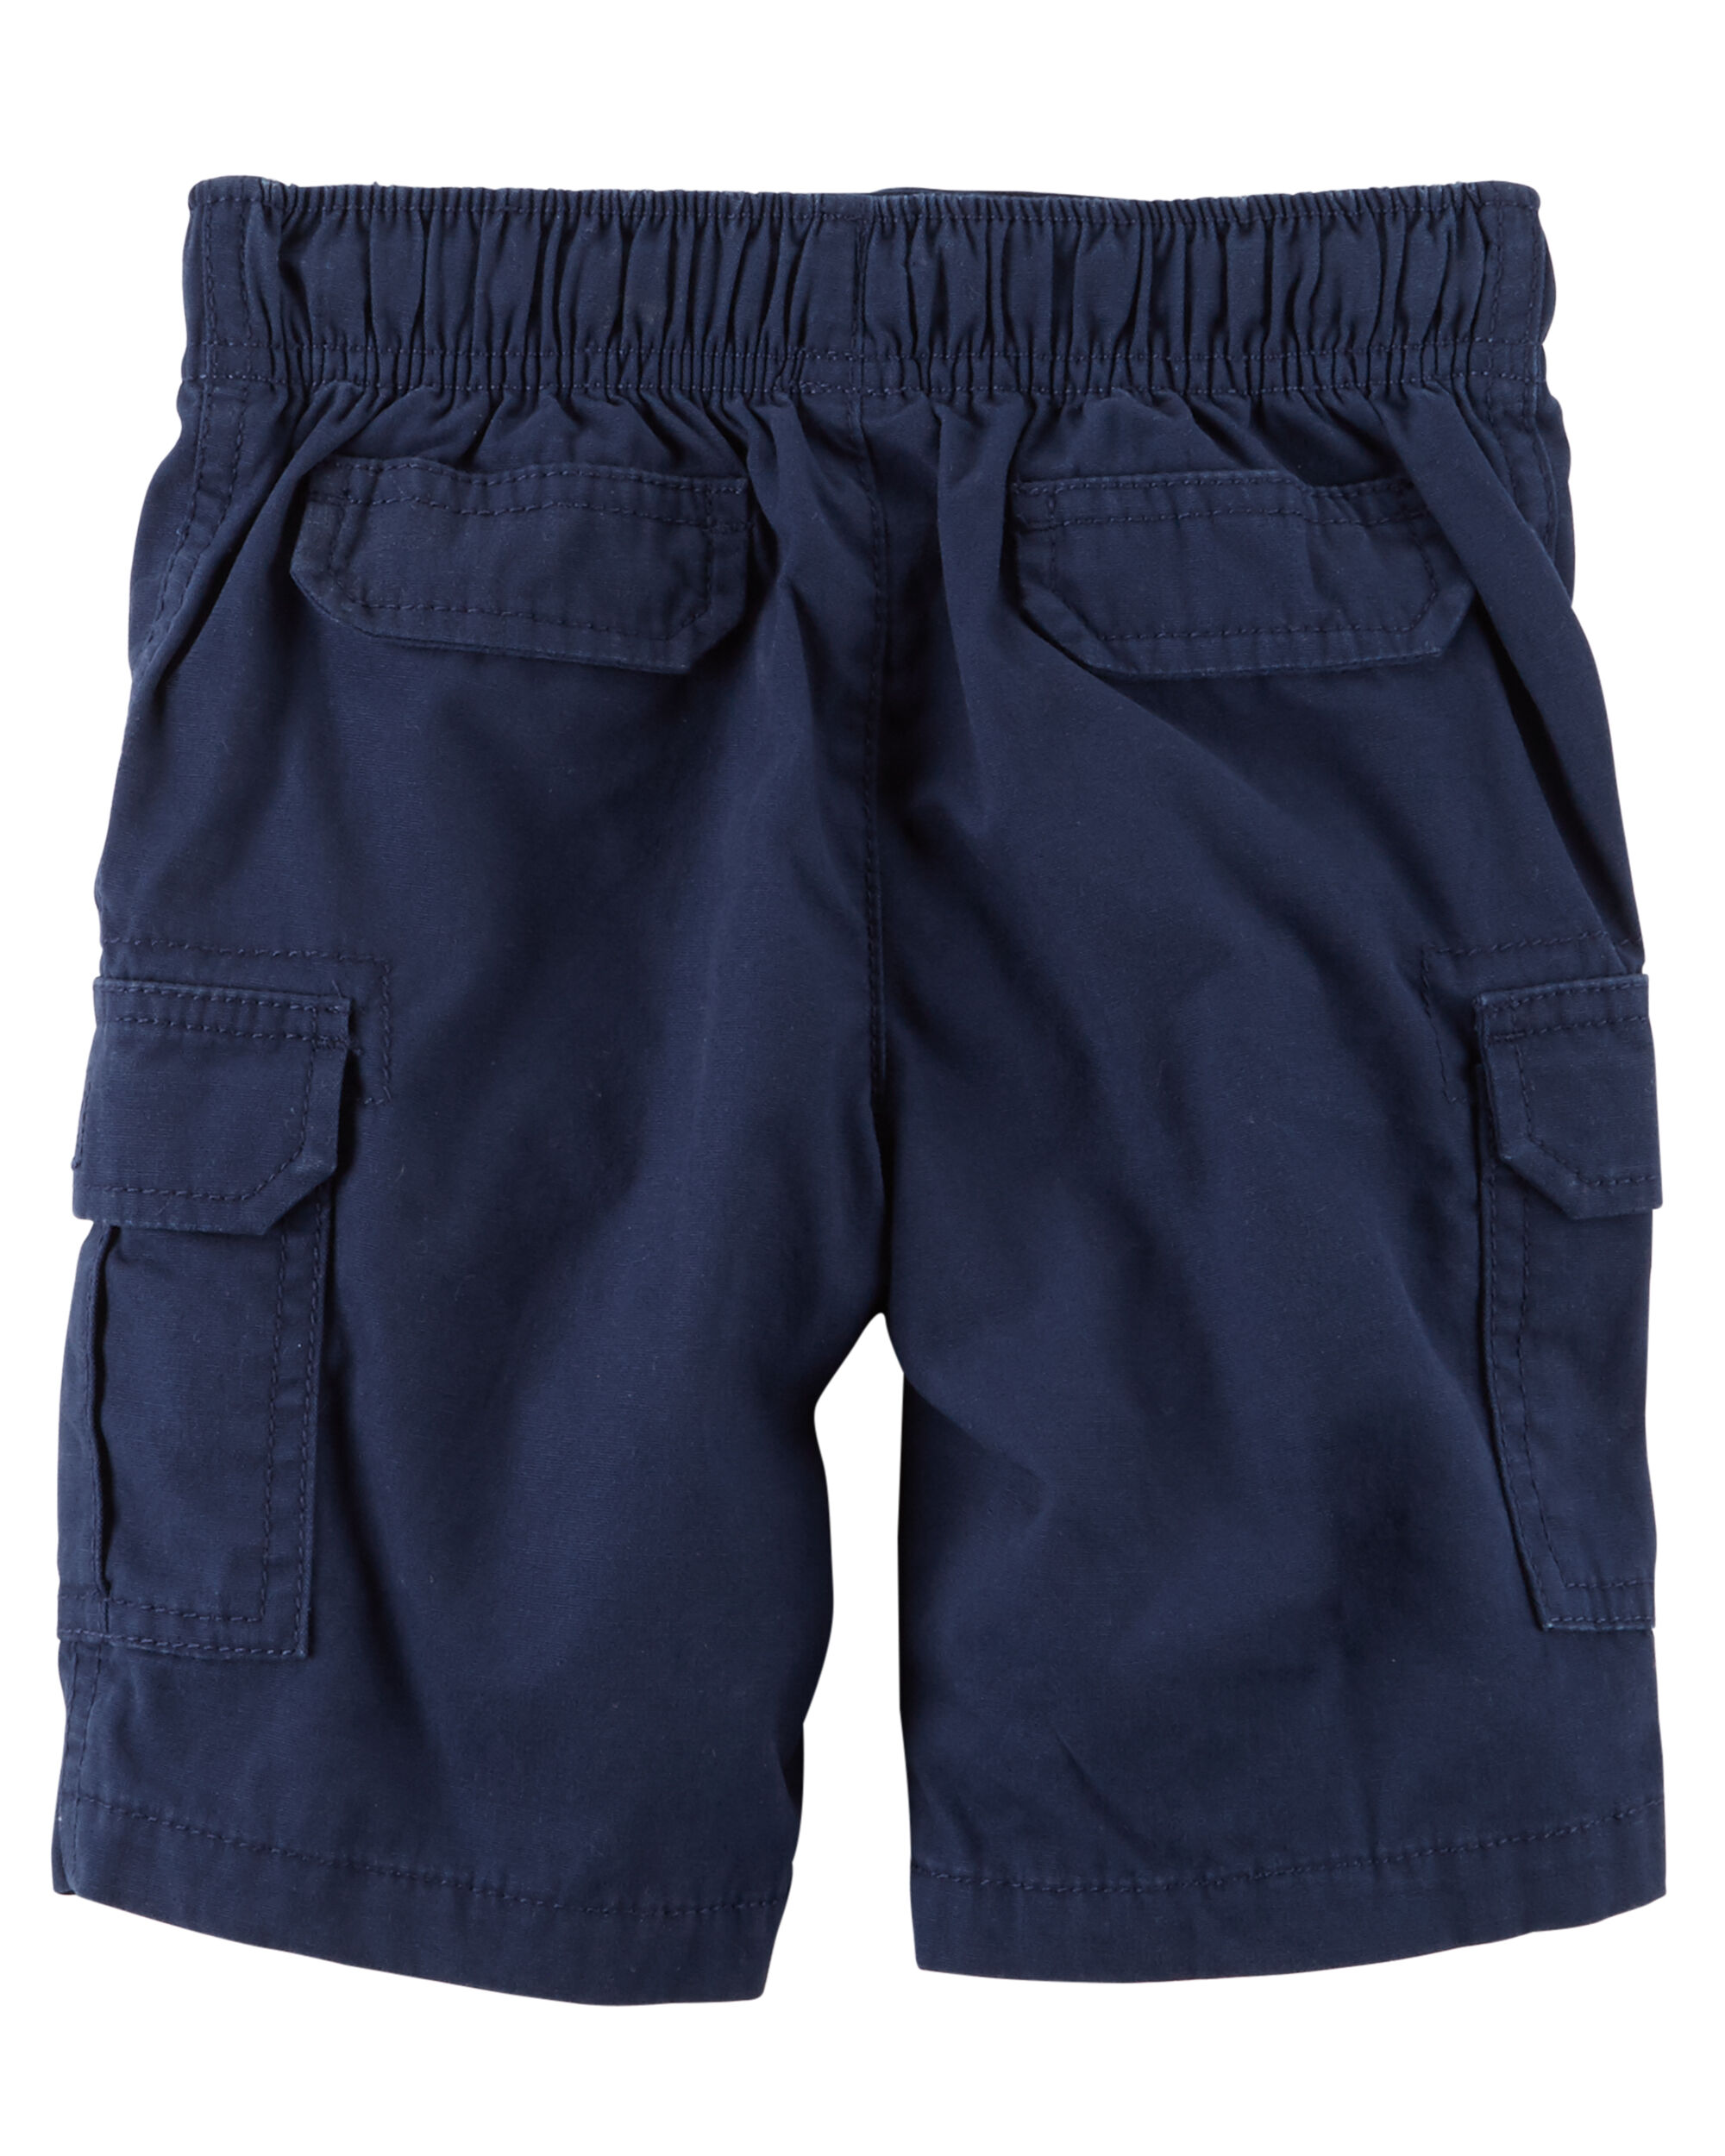 Pull-On Cargo Shorts | Carters.com